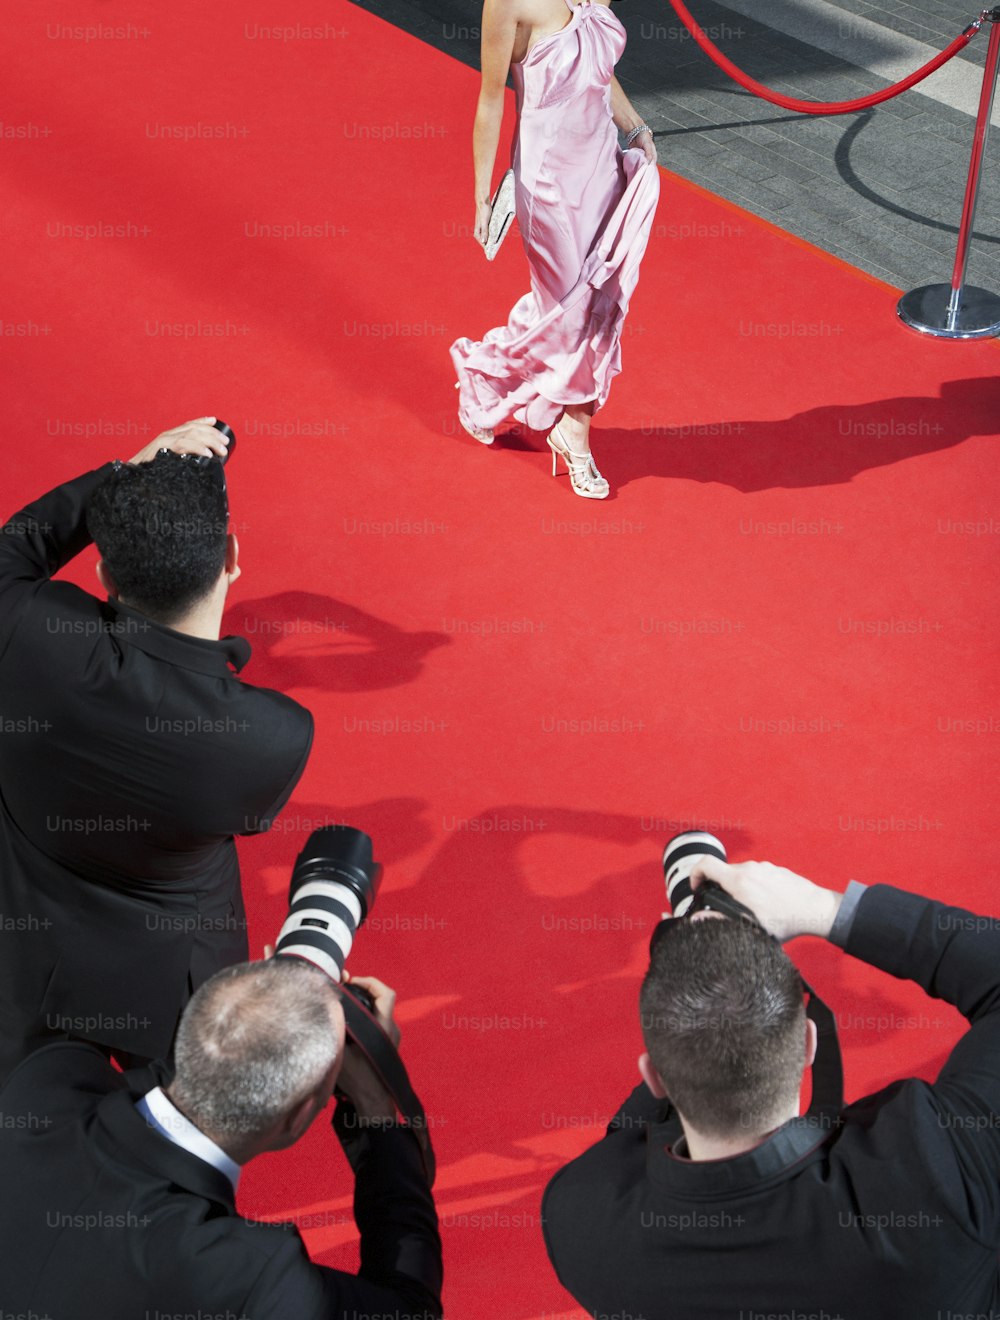 a woman in a pink dress standing on a red carpet